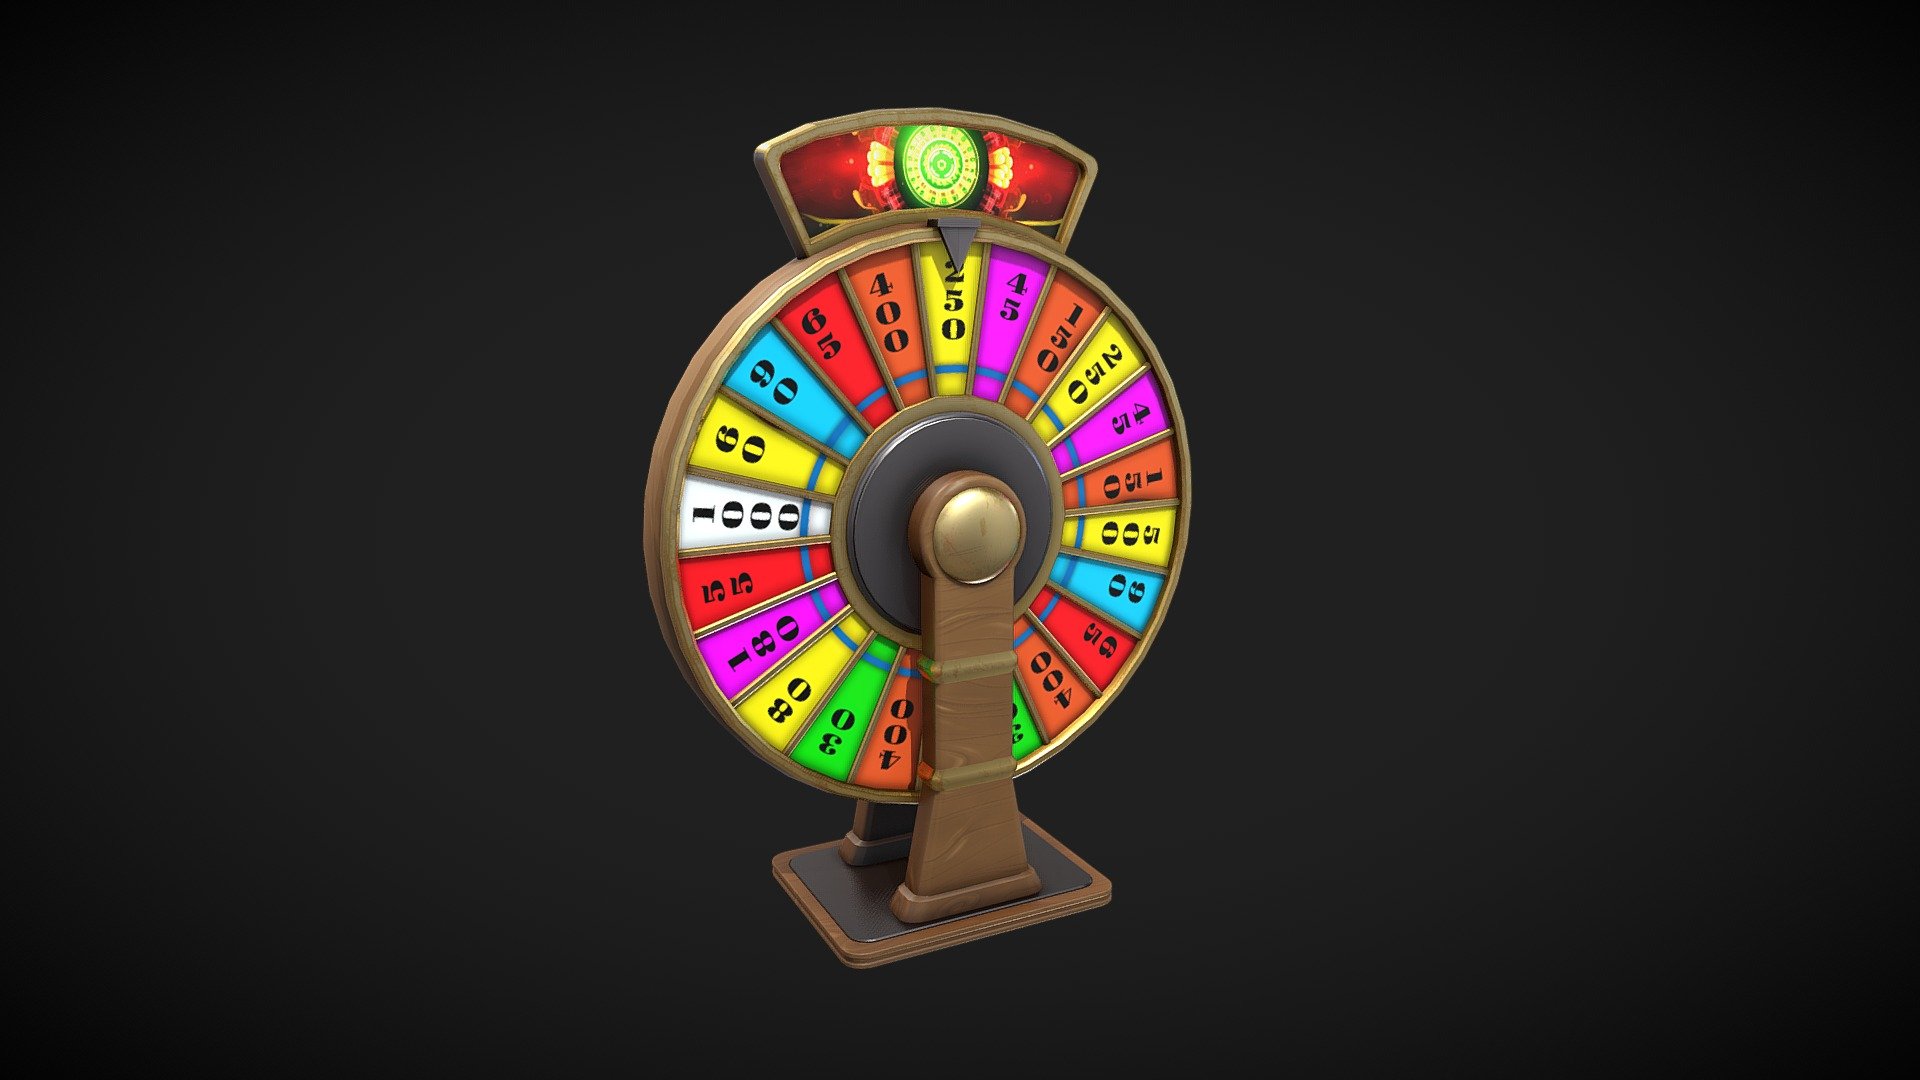 3D Lucky Spin Machine 2 modeling optimized and ready for your personal projects, references and more.

Textures atlas 2048x2048
(VR, AR, Web and Video Game Ready Modeling)

File Format:
- Maya
- Blender
- FBX
- OBJ
- gLTF

Learn more:
Instagram https://www.instagram.com/kraffingdesign/?hl=en-la - Lucky Spin Machine 2 - Buy Royalty Free 3D model by kraffing Studio (@kraffing) 3d model